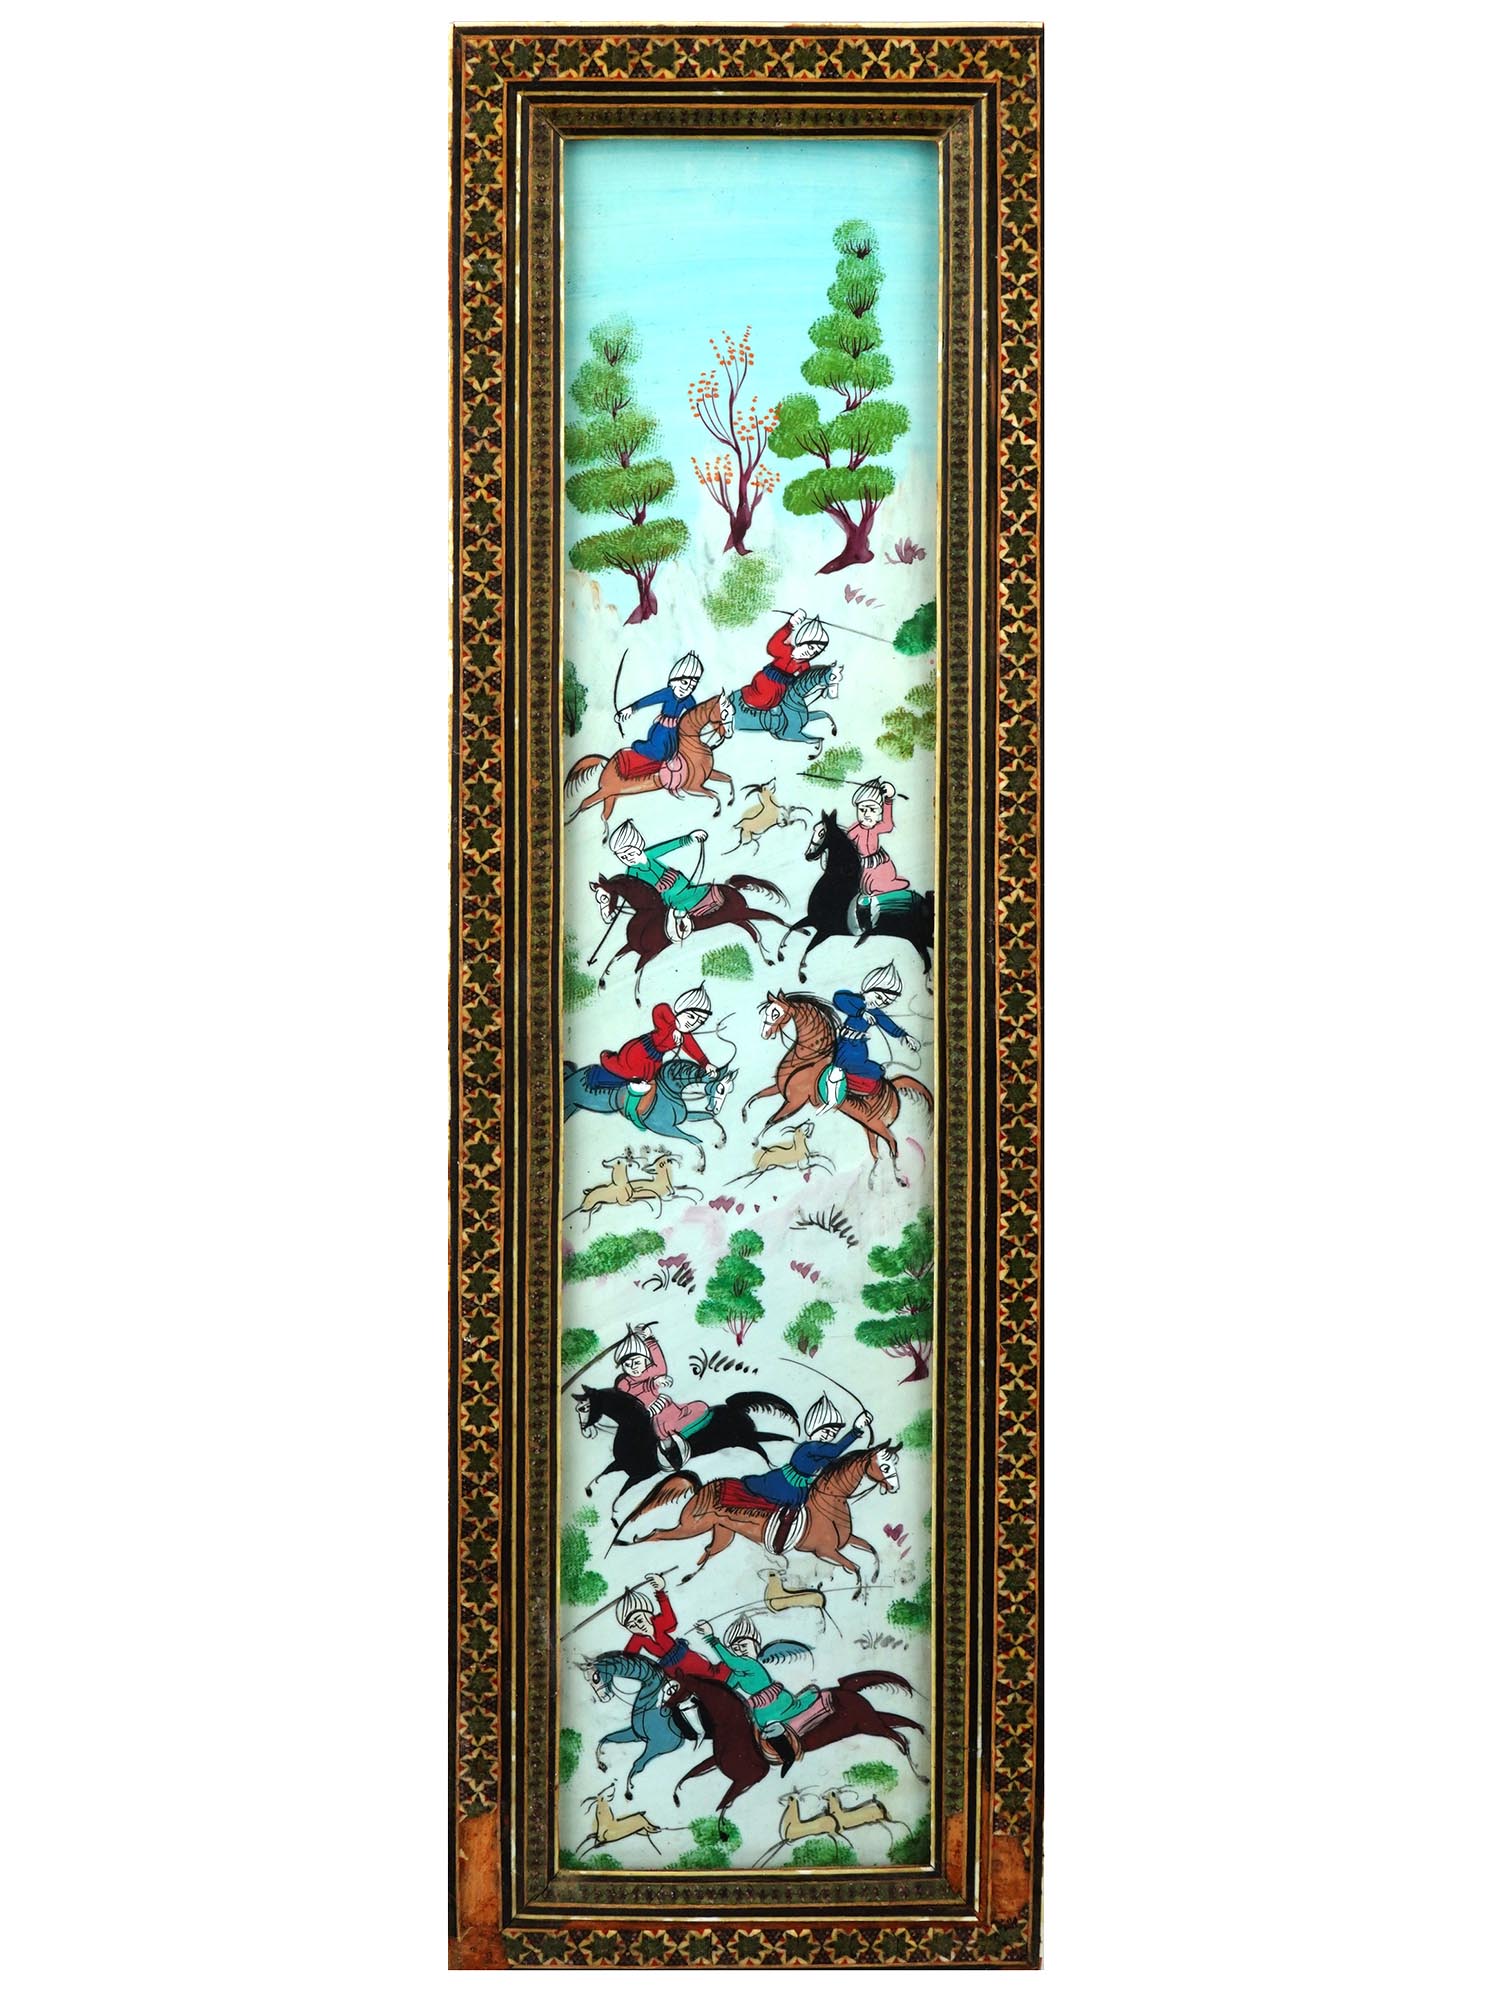 PERSIAN SURATGARI PAINTING IN MARQUETRY KHATAM FRAME PIC-0